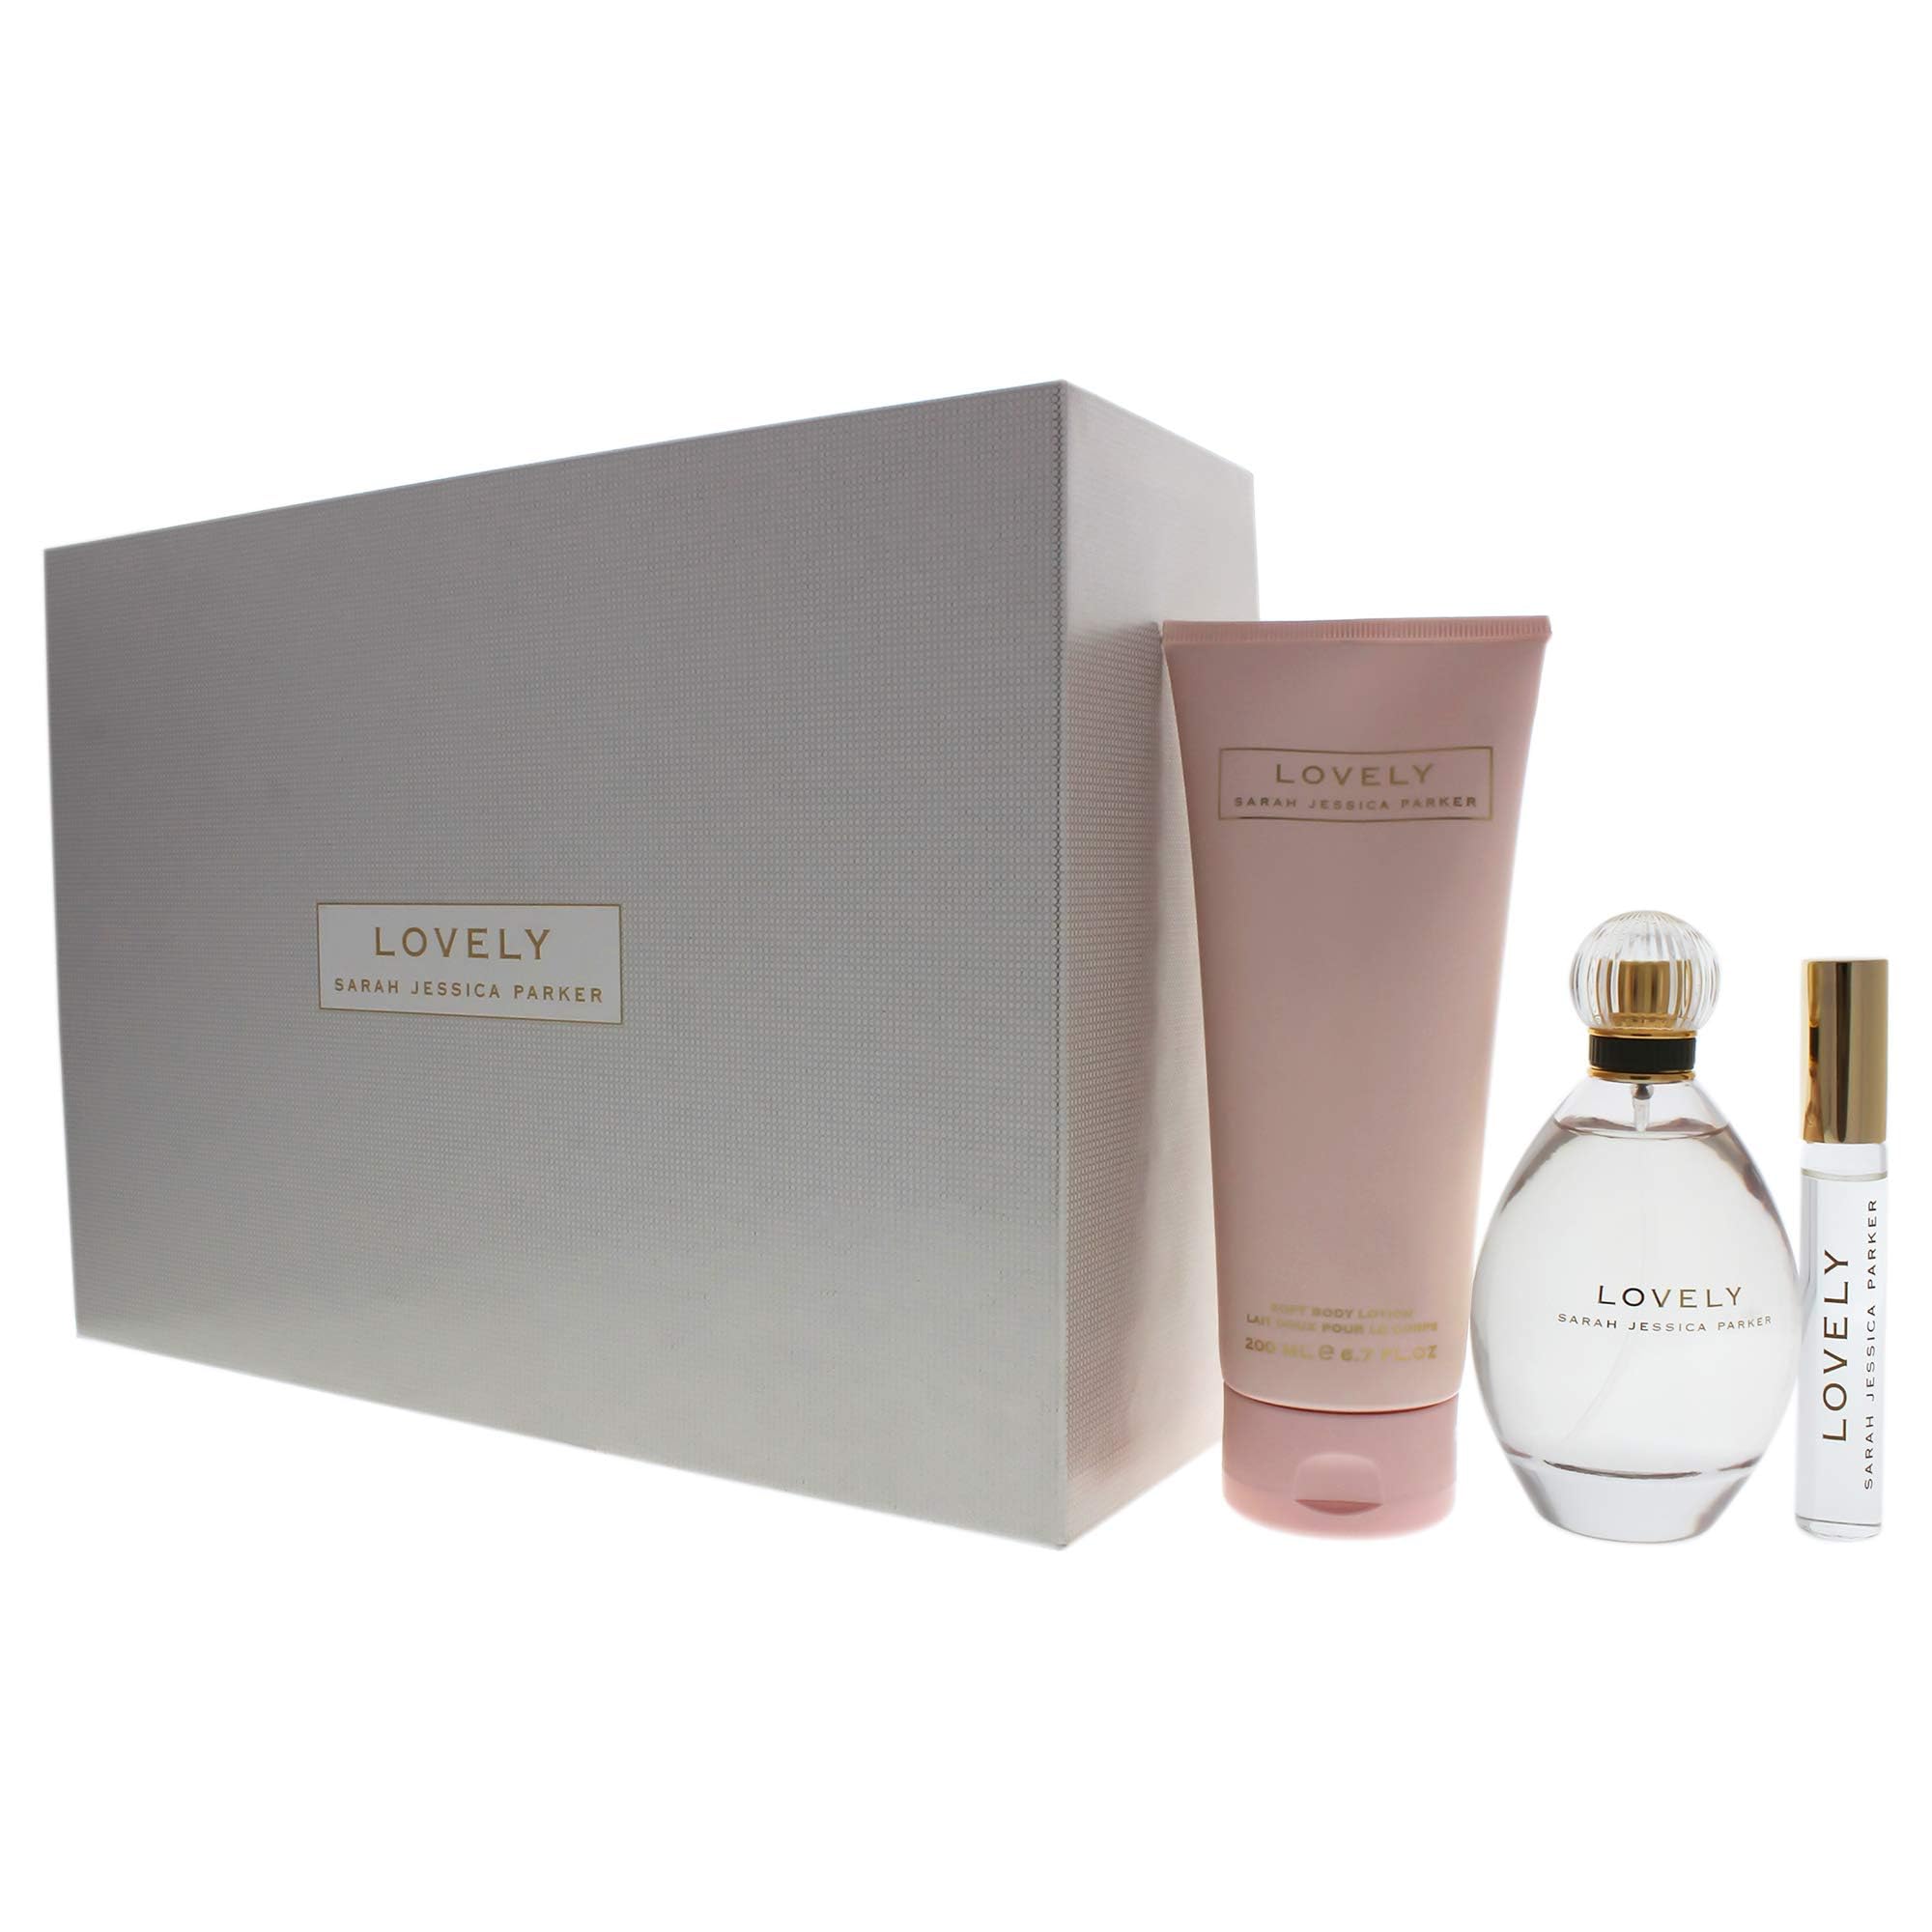 Sarah Jessica Parker Lovely - Women's Perfume and Body Care Gift Set - Includes Eau De Parfum, Rollerball, and Soft Lotion in Iconic Lovely Fragrance - Notes of Mandarin, Lavender, and Apple - 3 pc